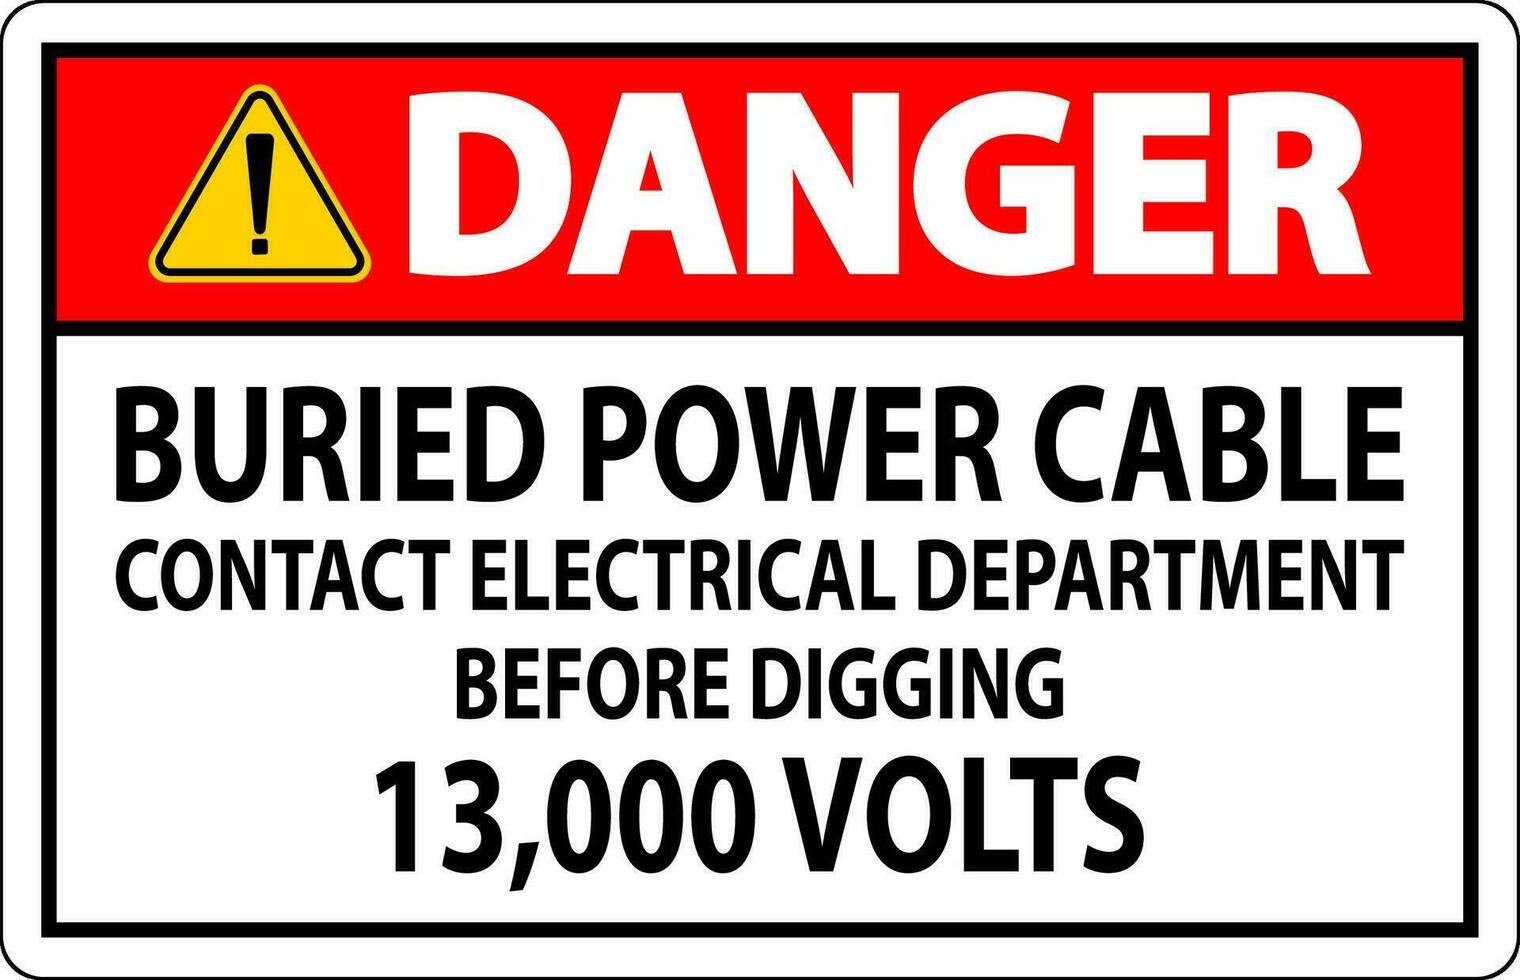 Danger Sign Buried Power Cable Contact Electrical Department Before Digging 13,000 Volts vector